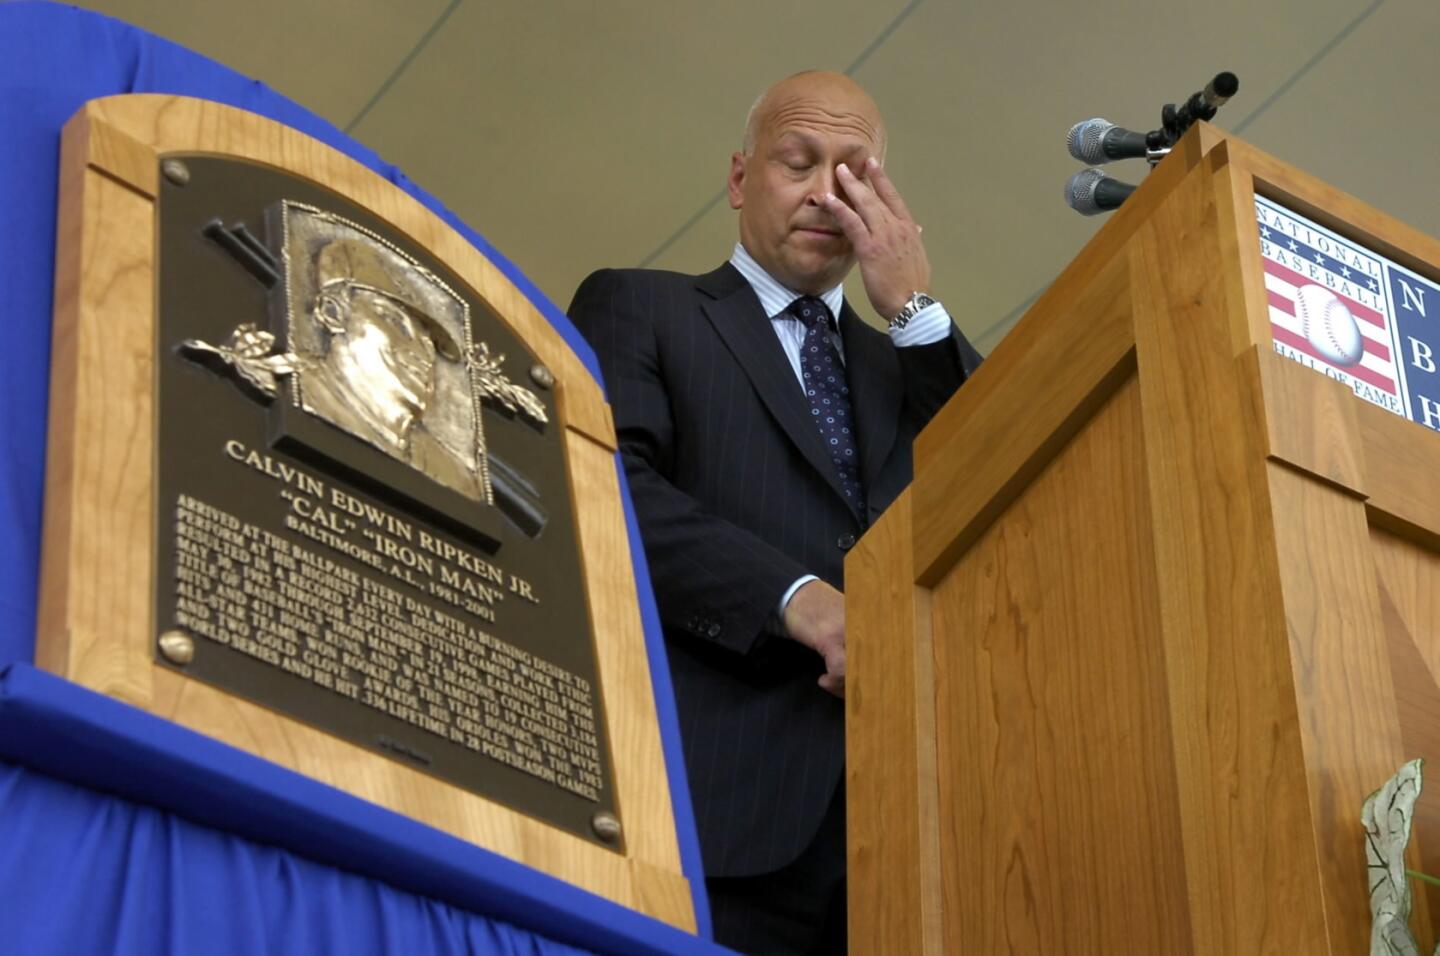 Cal Ripken Jr. makes his Hall of Fame induction speech, wiping away tears when he started to talk about his family.